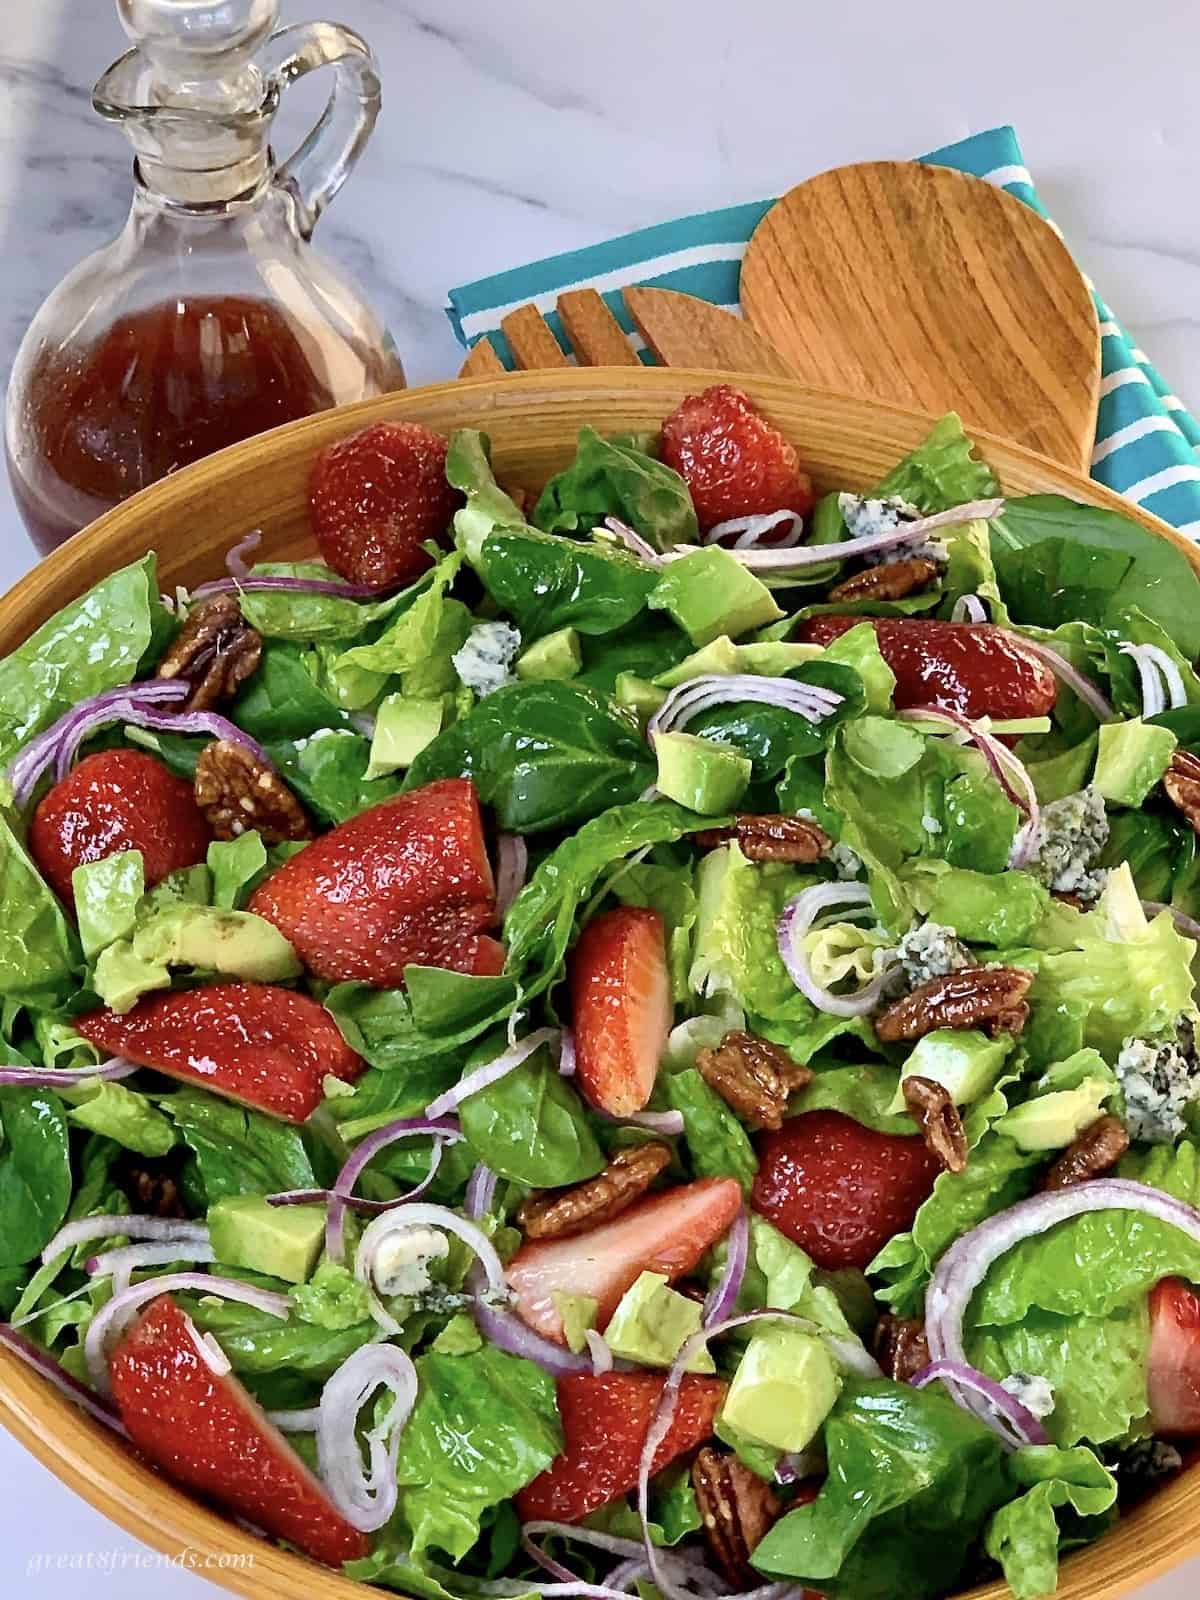 A mixed green salad with strawberries, pecans, and red onion in a wooden bowl.